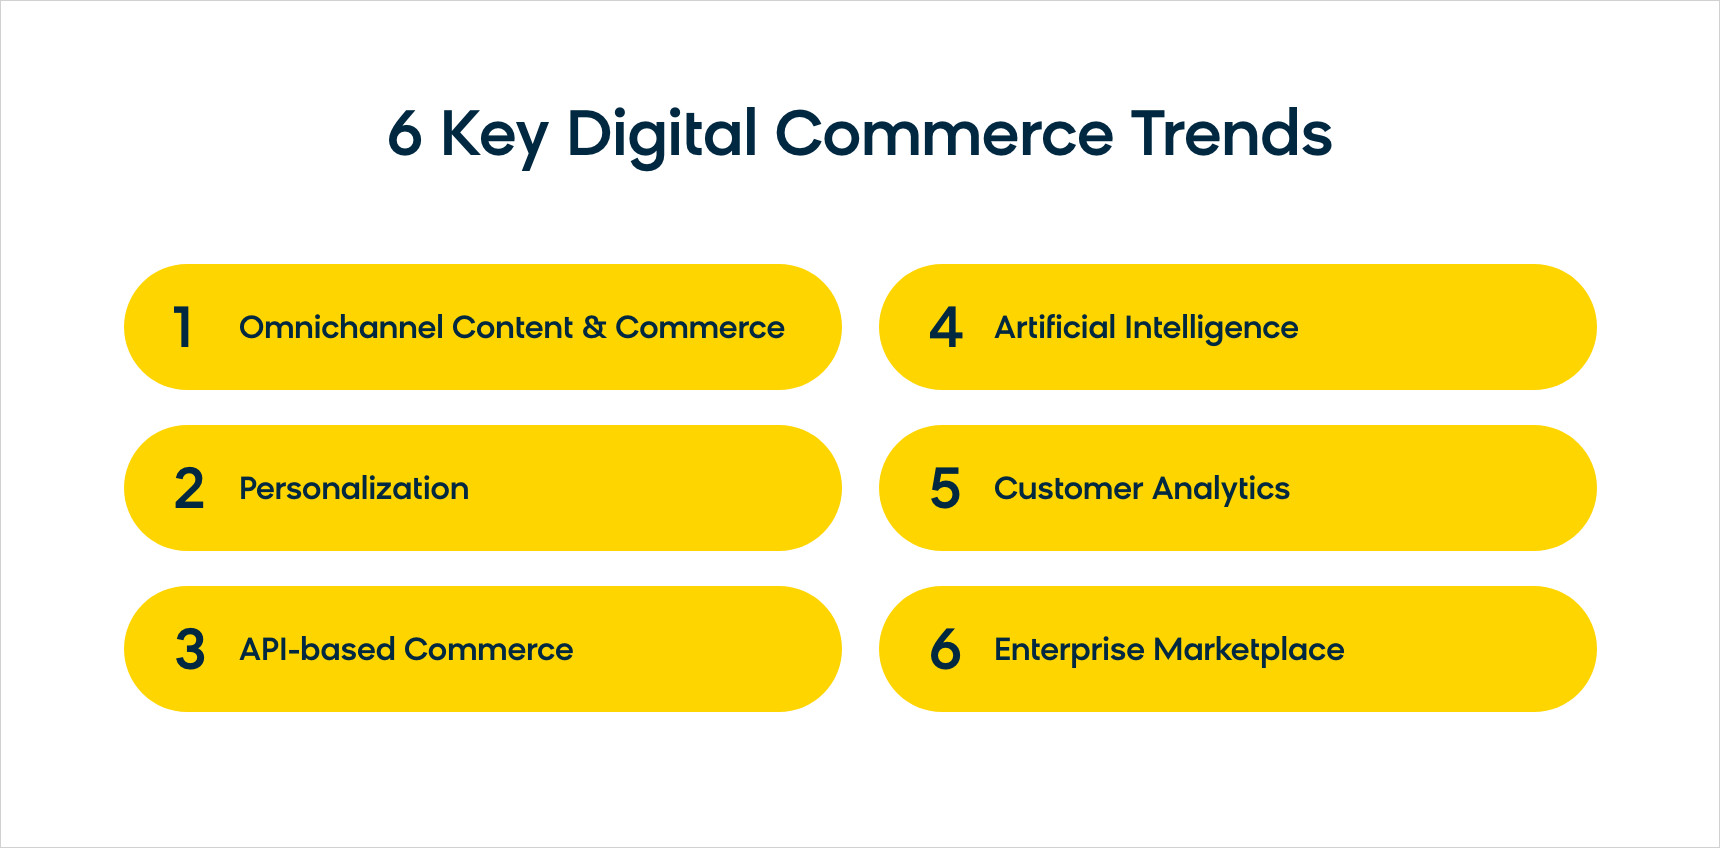 6 key digital commerce trends for businesses to focus on